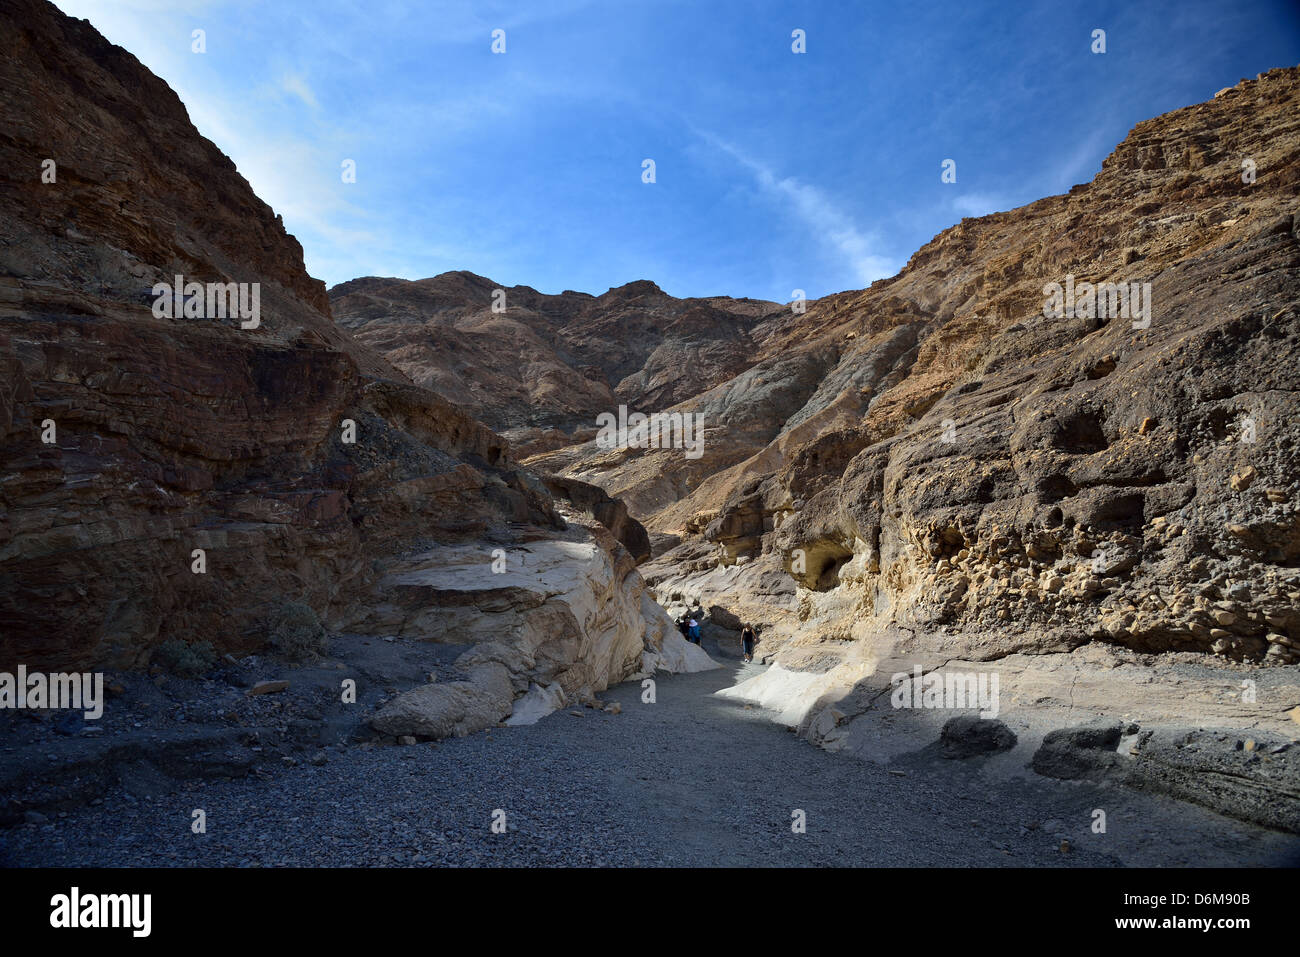 Dry river bed through Mosaic Canyon. Death Valley National Park, California, USA. Stock Photo